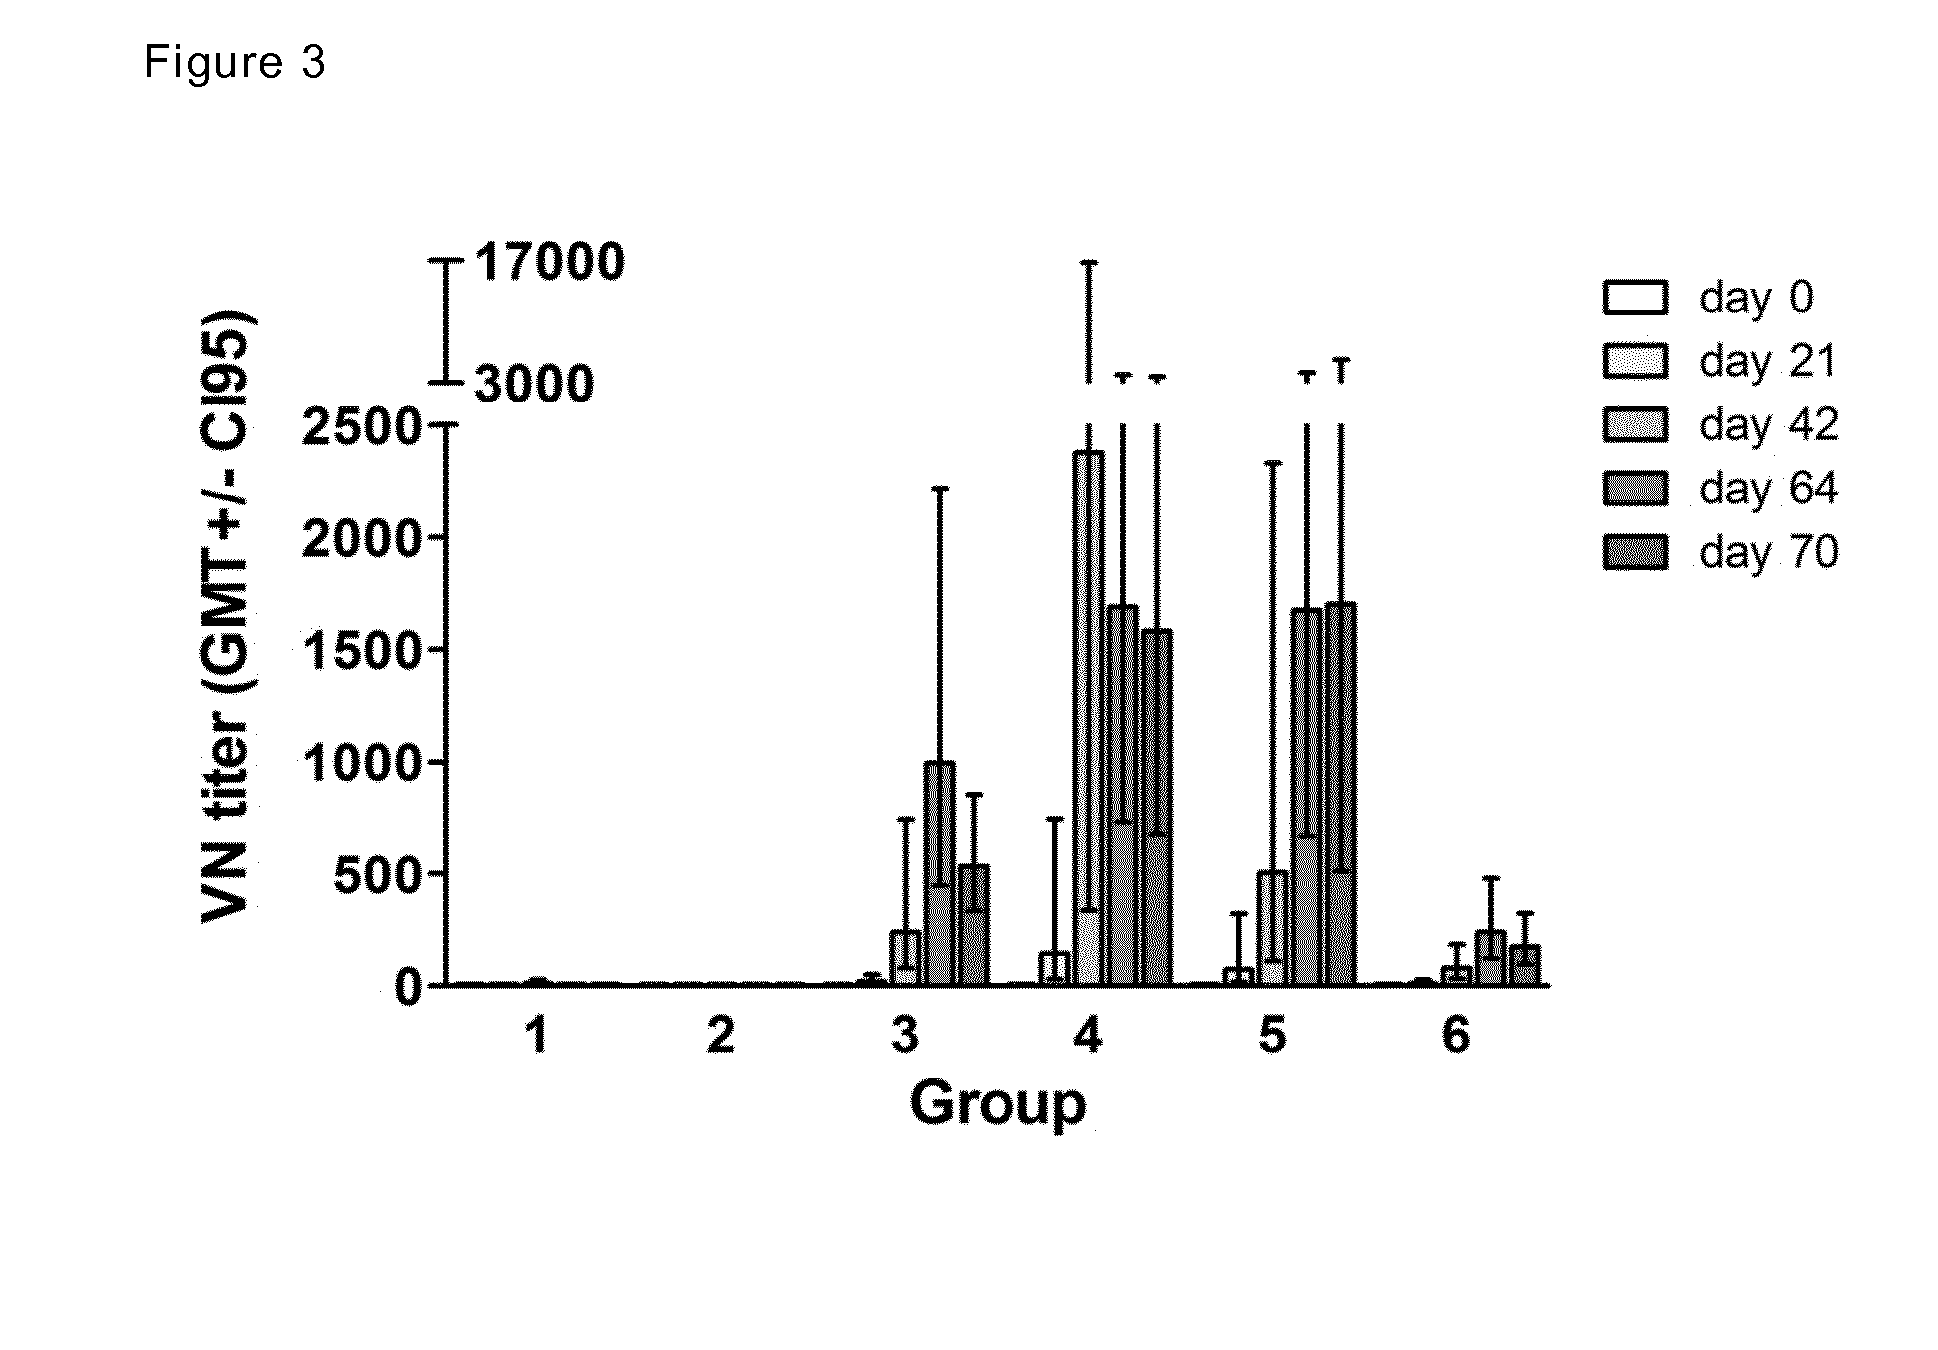 Vaccine composition for naive subjects